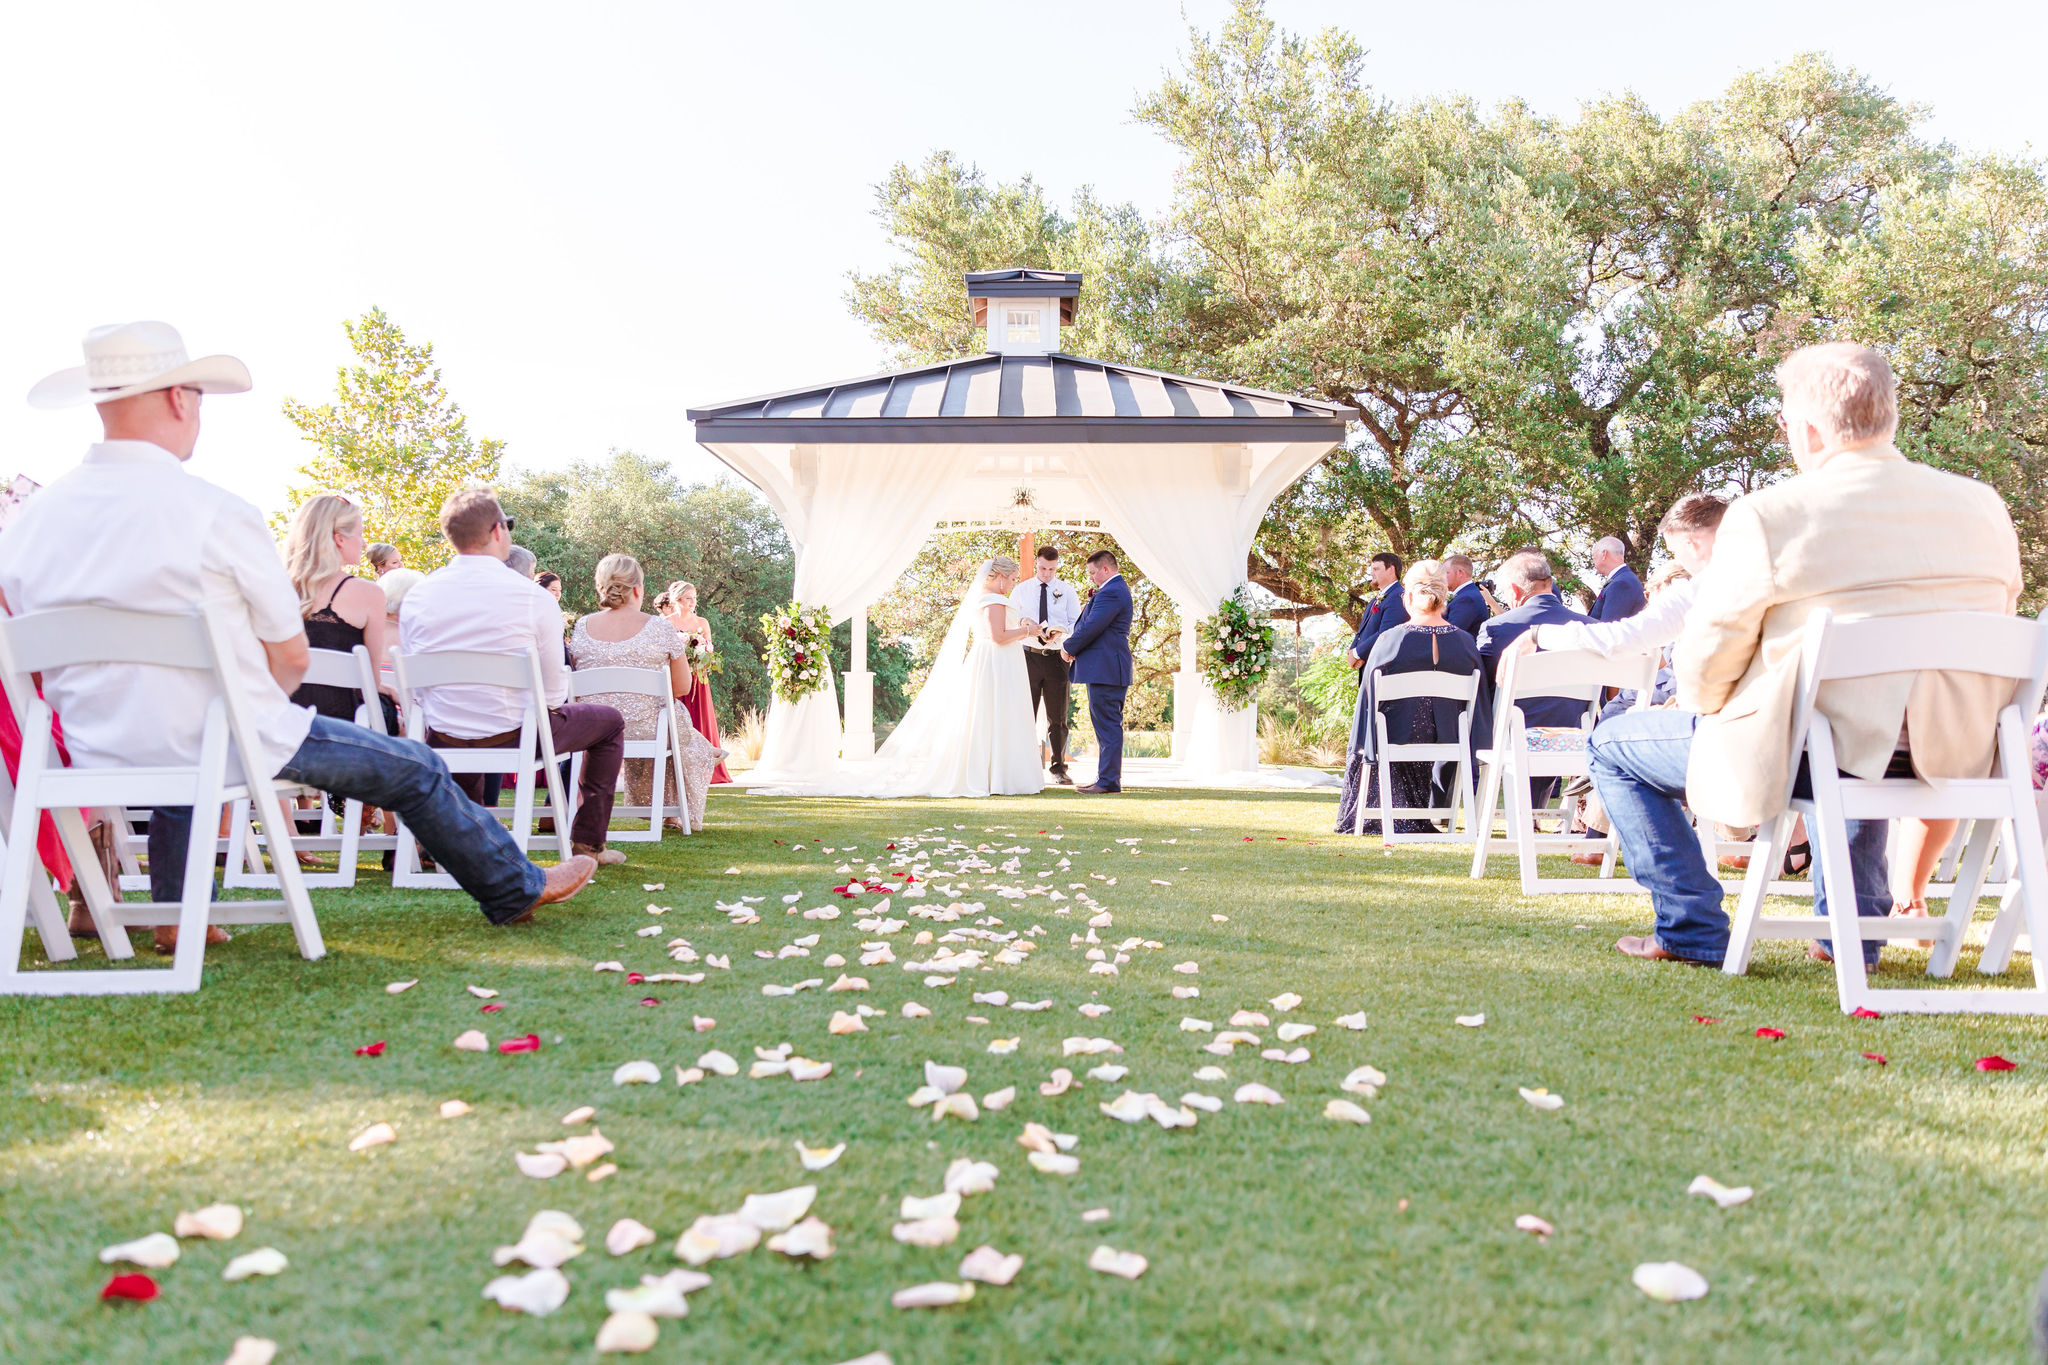 Outdoor gazebo wedding ceremony location at Kendall Point